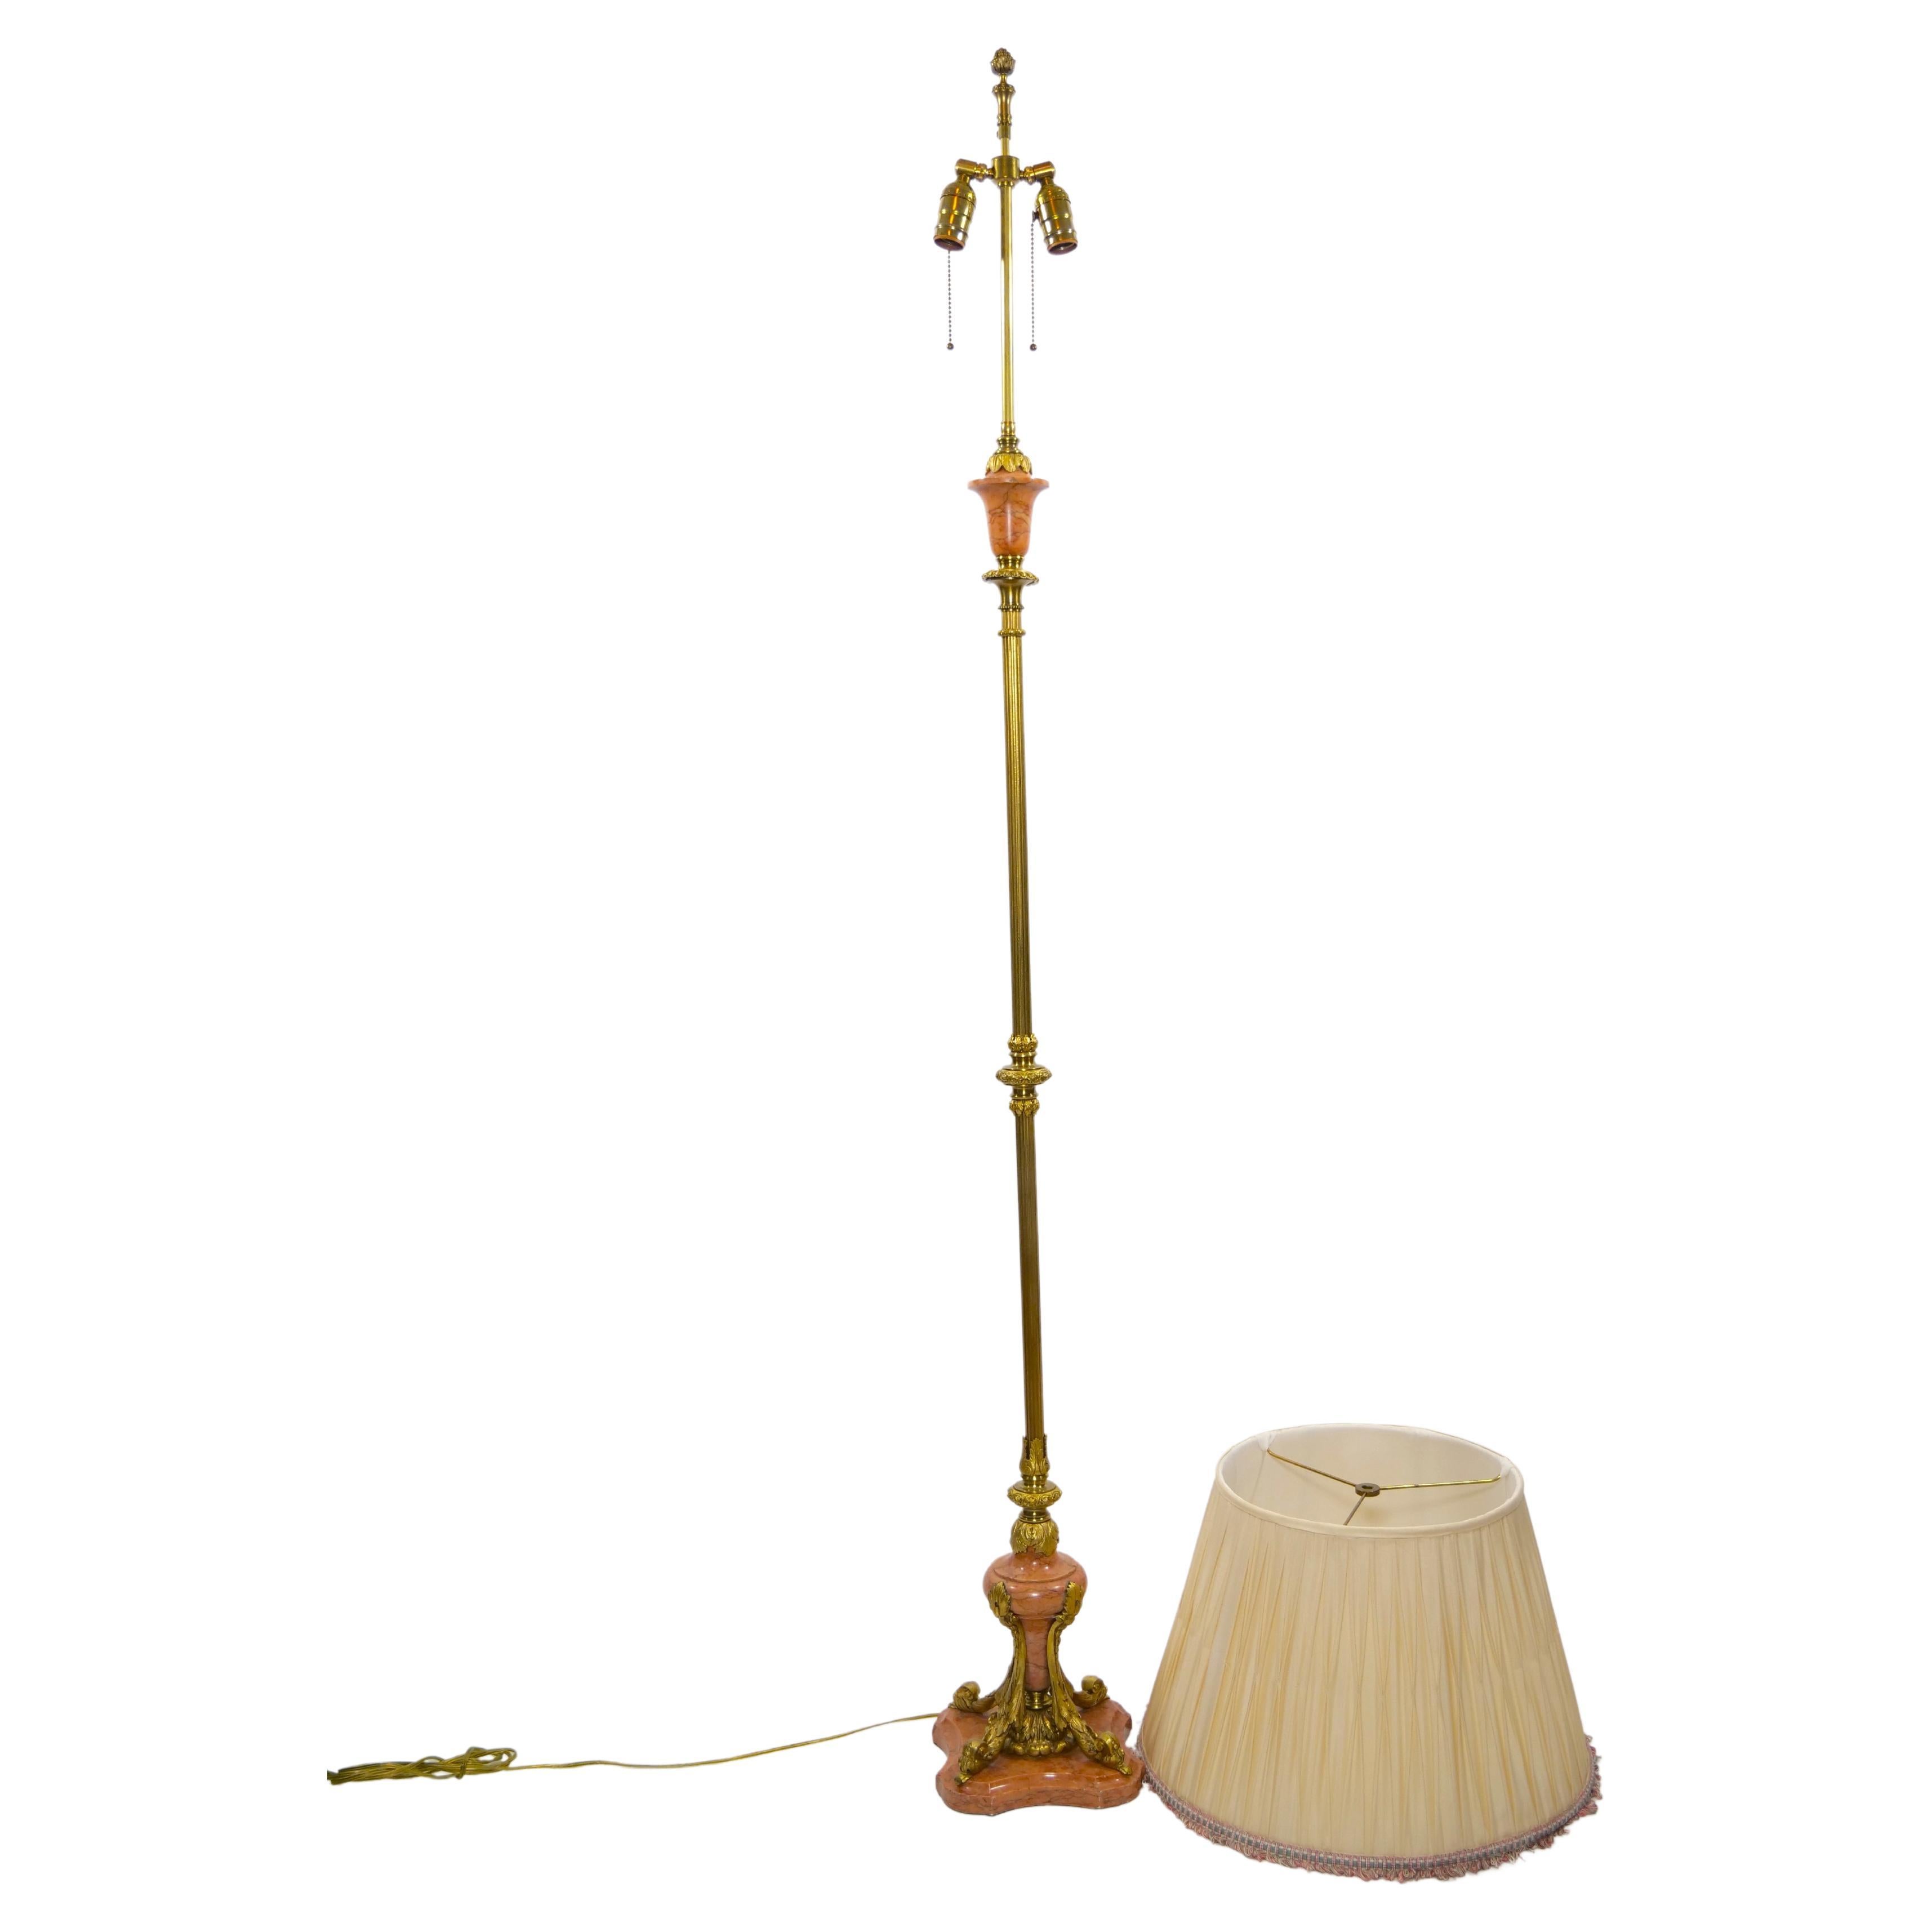 Late 19th century hand crafted gilt brass with marble base Italian floor lamp. The floor lamp features a very slender shape with design details resting on a square marble base. The lamp comes with a silk pleated interior shade. It is in great